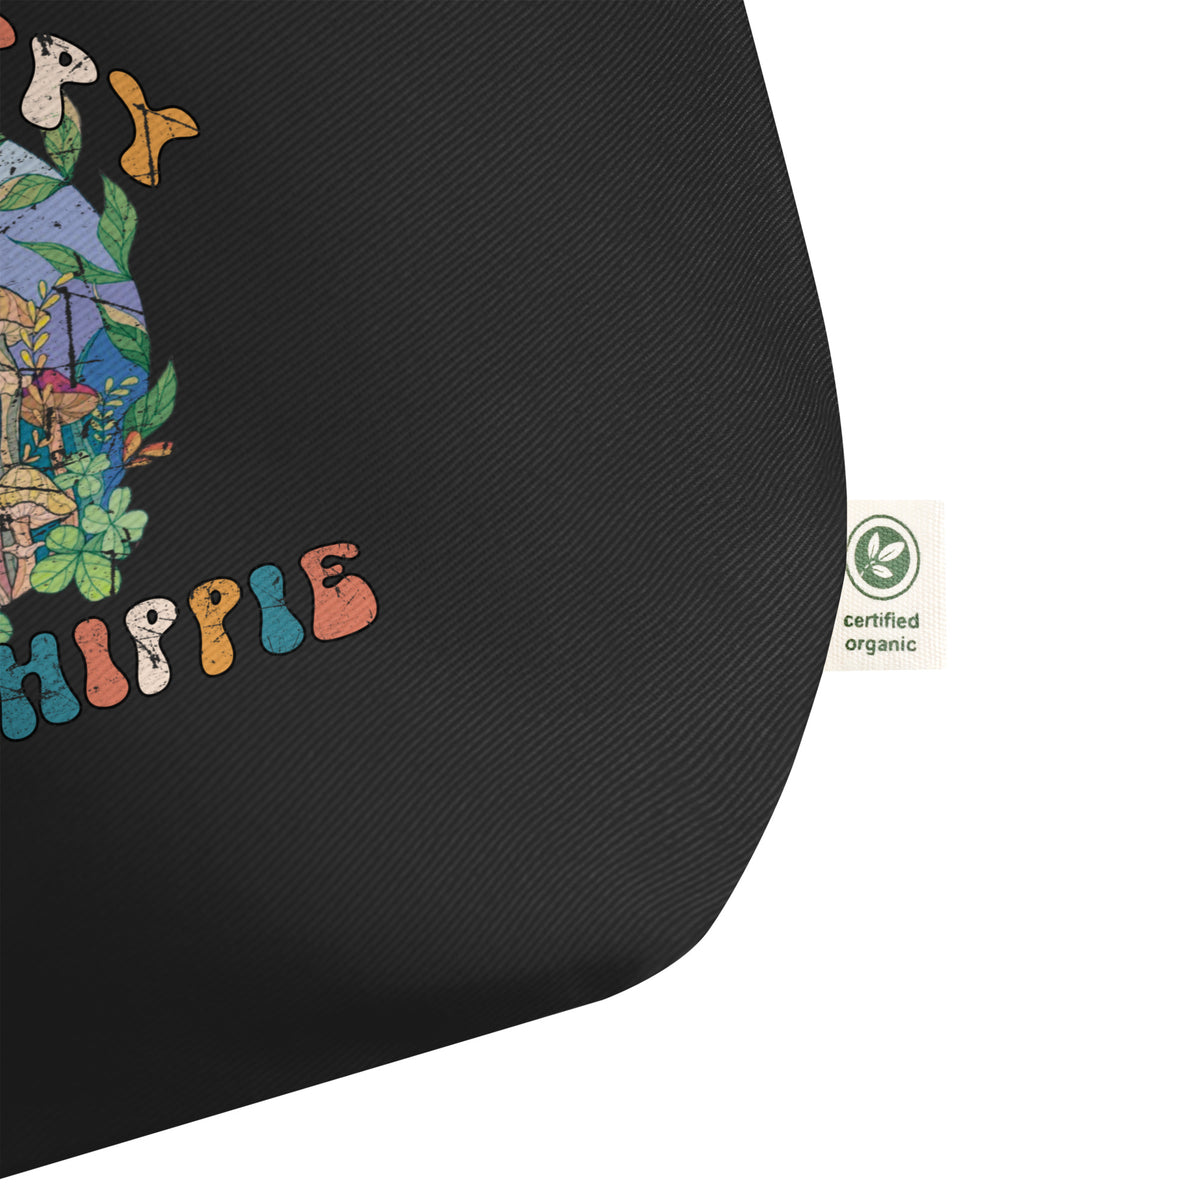 Stay Trippy Little Hippie Eco Tote